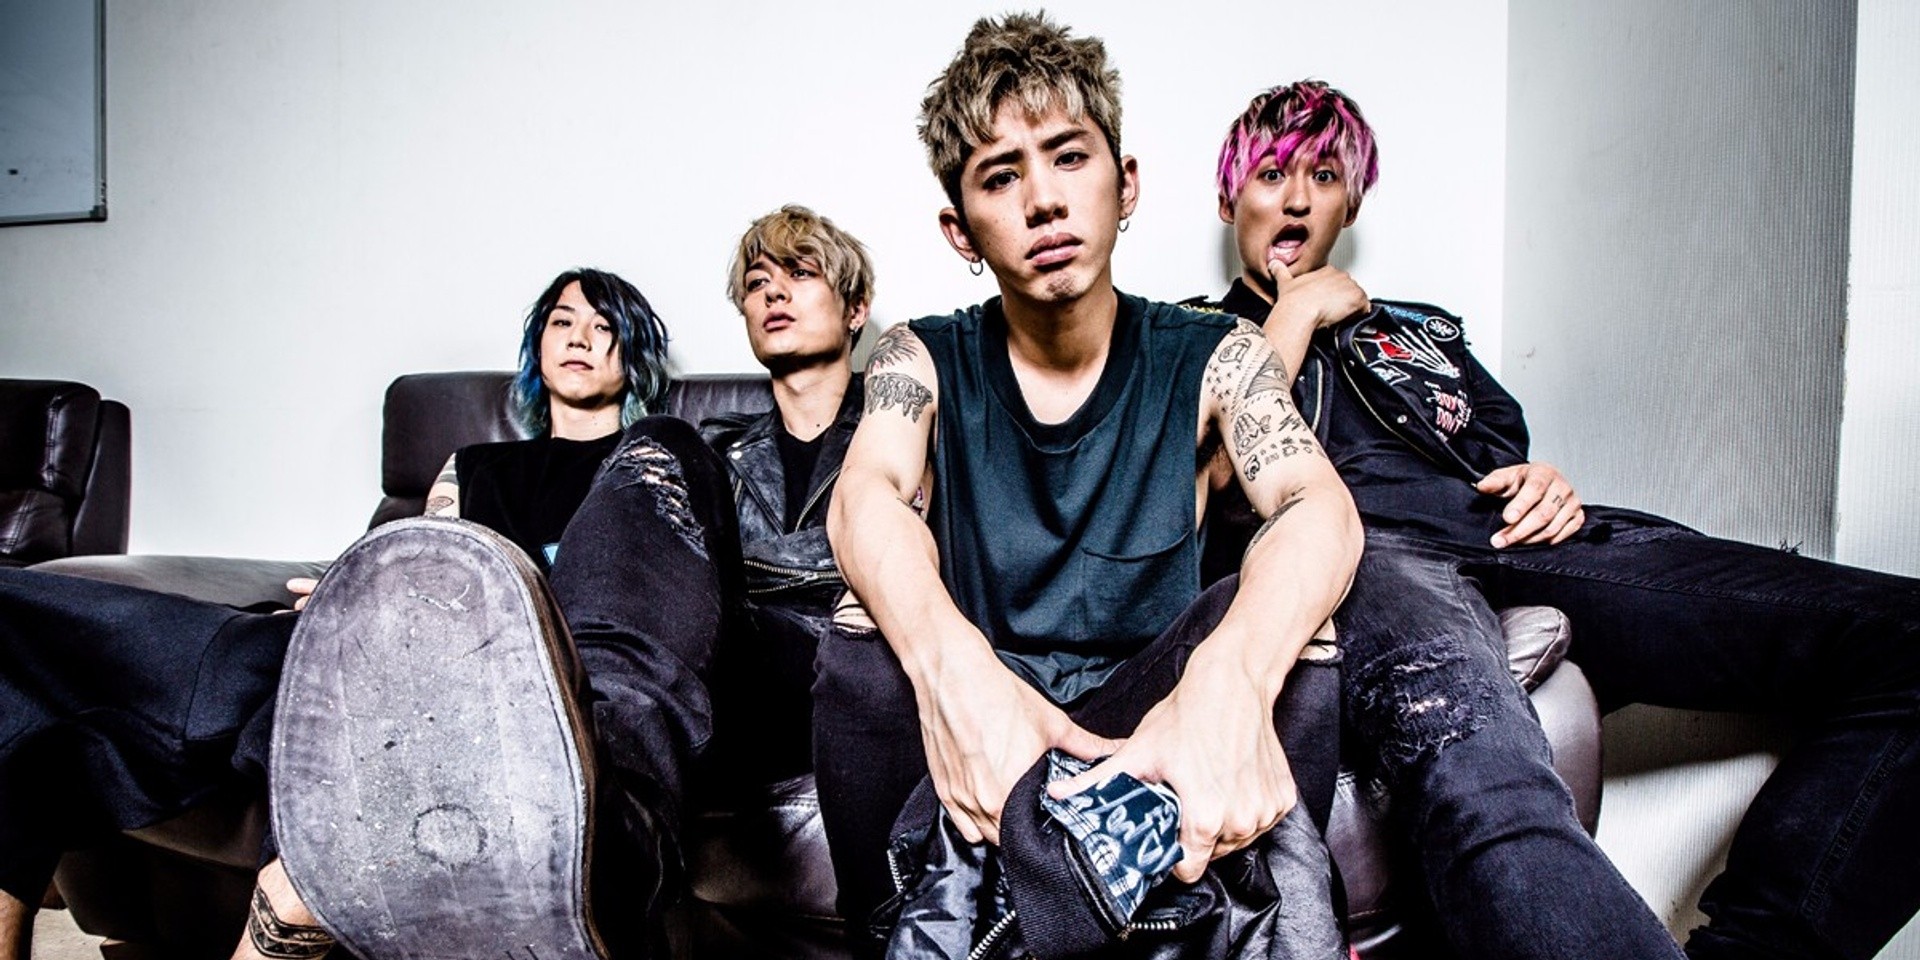 ONE OK ROCK to play their biggest show in Singapore yet, full Southeast Asia tour announced